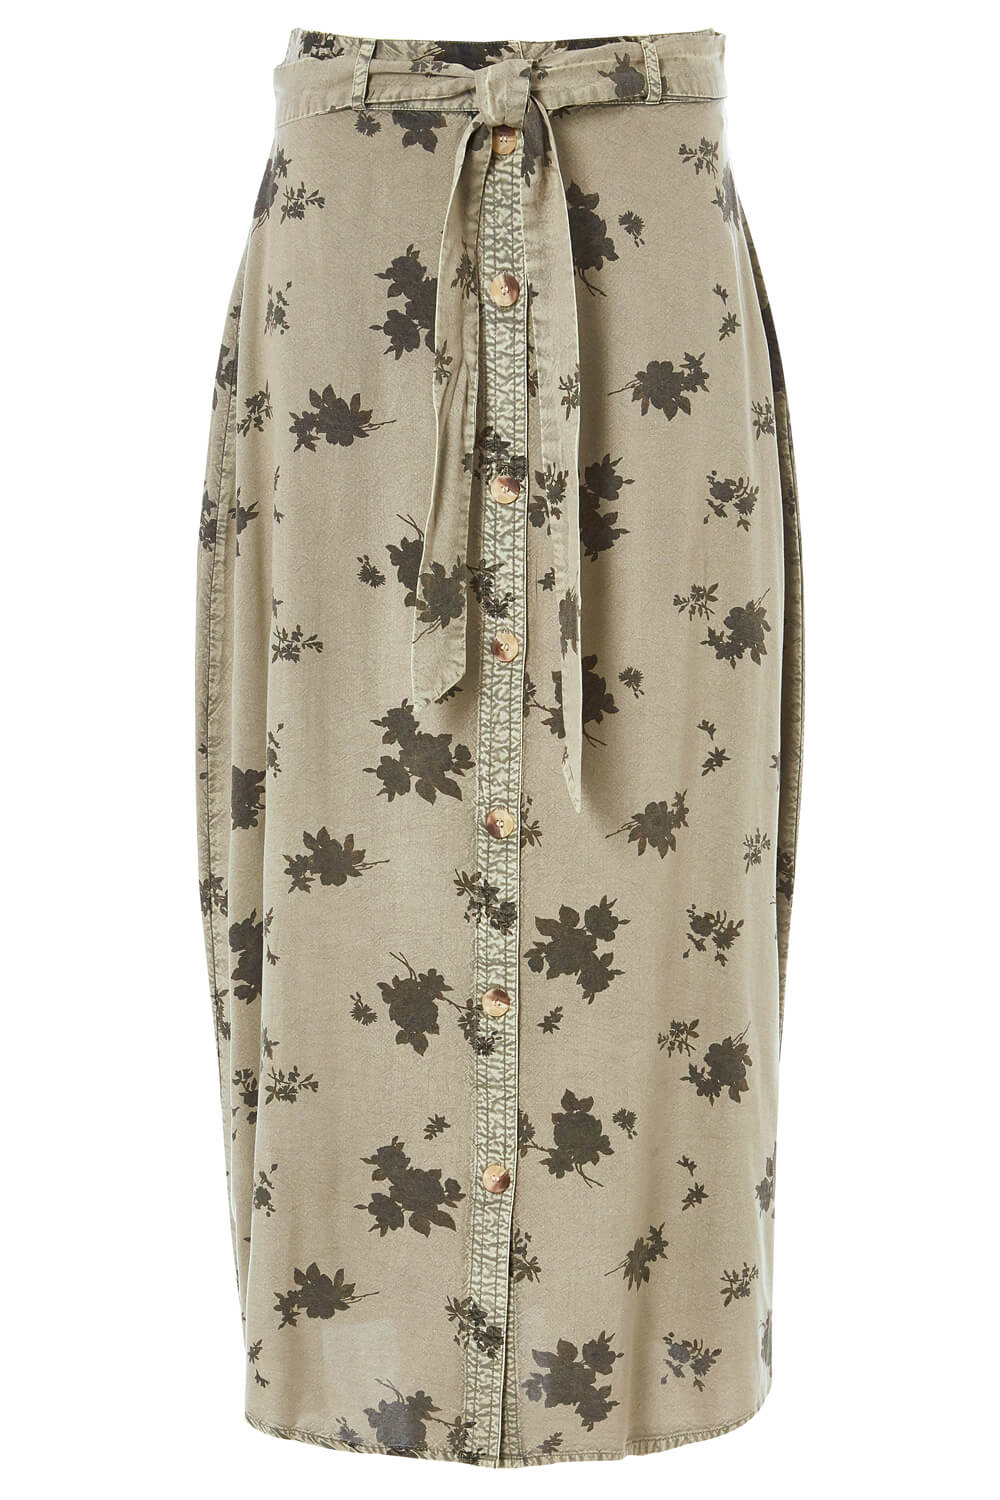 KHAKI Floral Print Button Front Skirt, Image 5 of 5